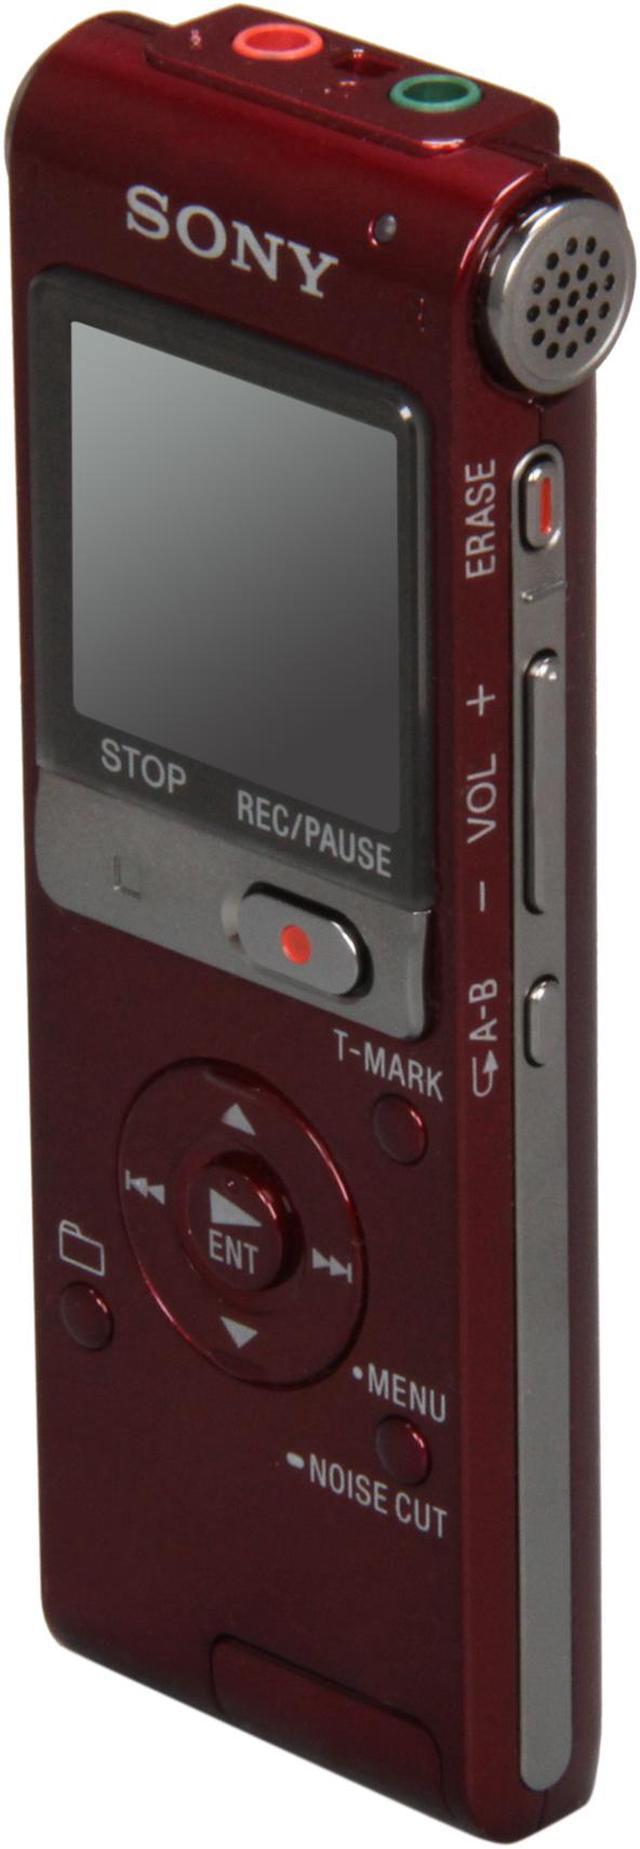 Sony ICD-UX512 2GB Flash Memory Digital Voice Recorder (Red